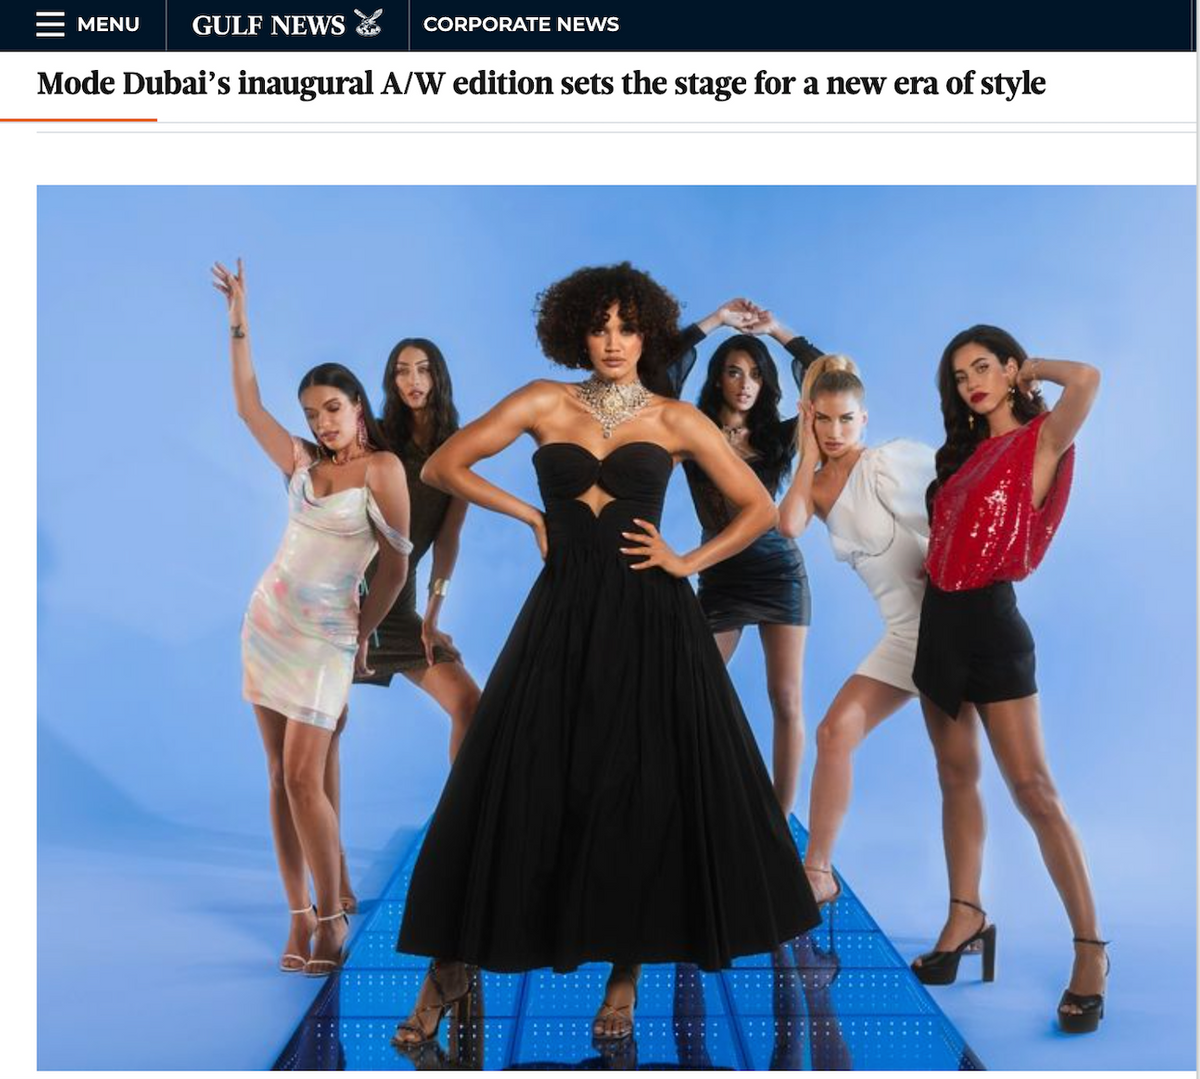 GULF NEWS: Mode Dubai's inaugural A/W edition sets the stage for a new era of style